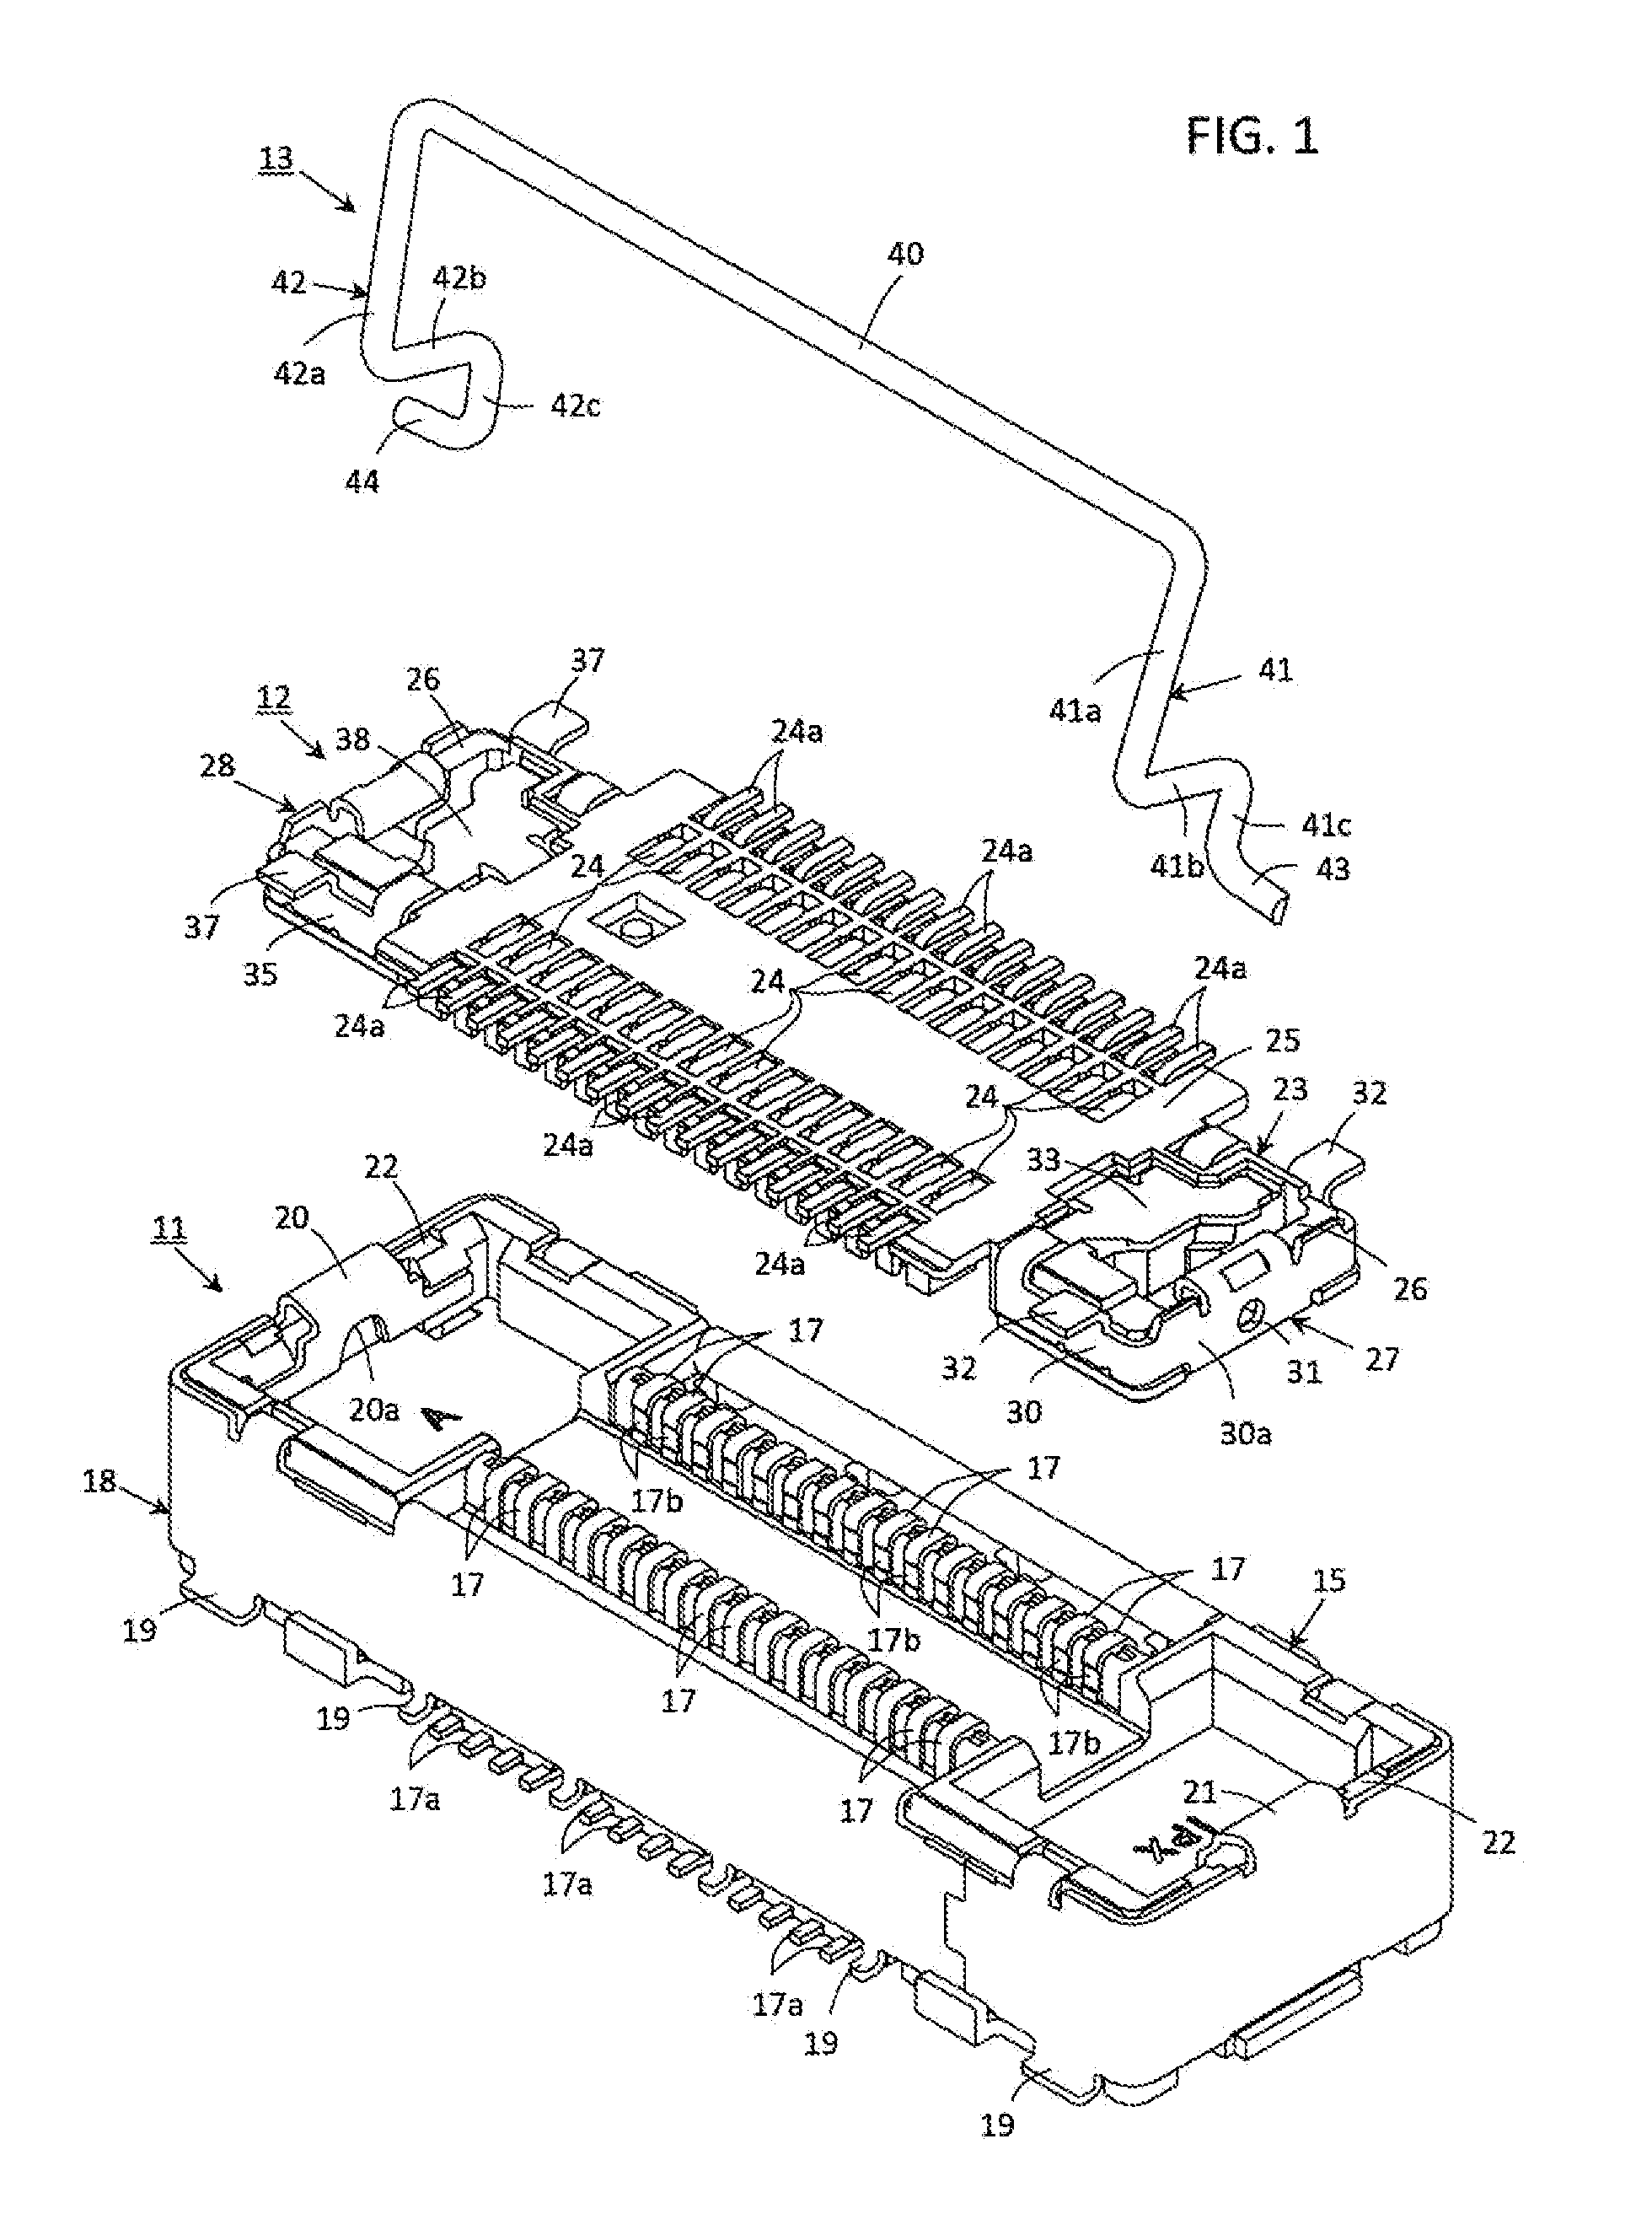 Circuit-terminal connecting device